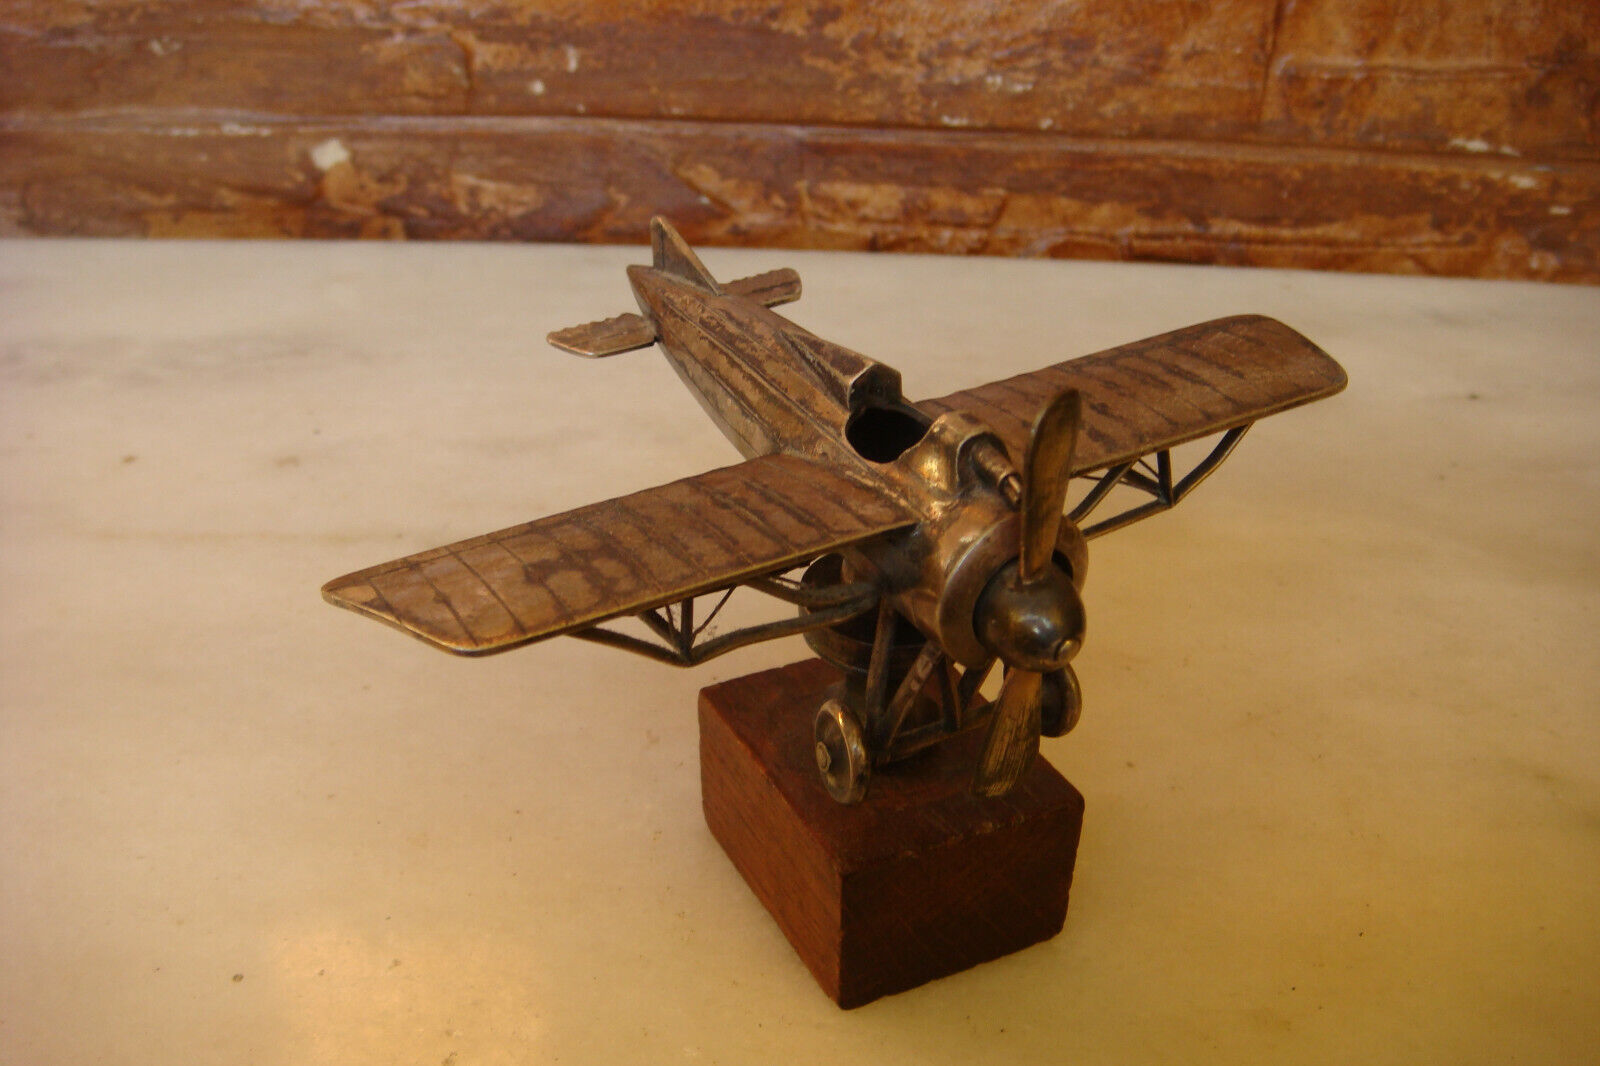 RARE OLD 1920 WWI MILITARY Airplane Plane Model HANDMADE Metal SILVERED type